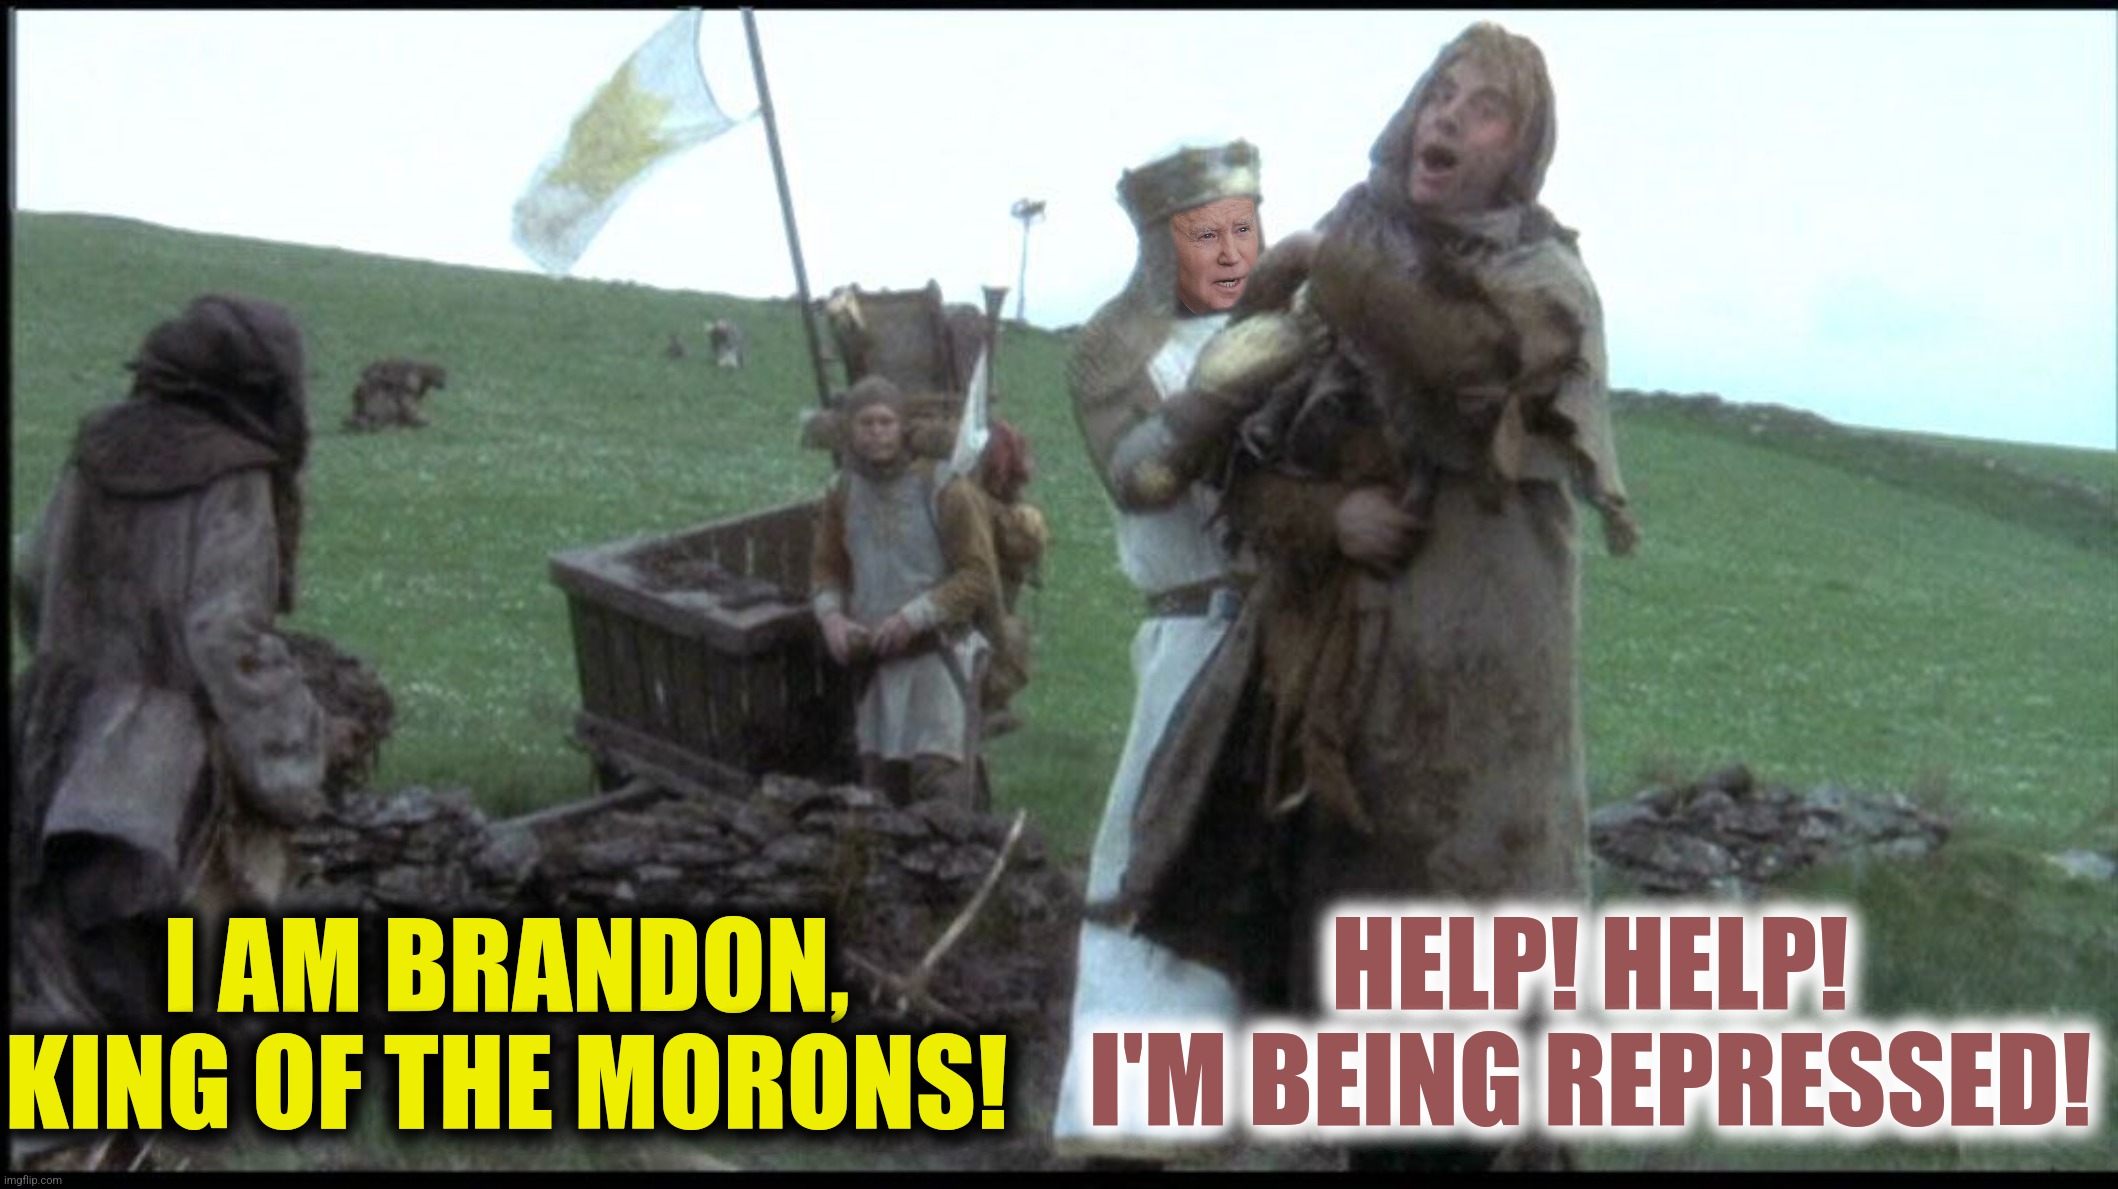 I AM BRANDON, KING OF THE MORONS! HELP! HELP! I'M BEING REPRESSED! | made w/ Imgflip meme maker